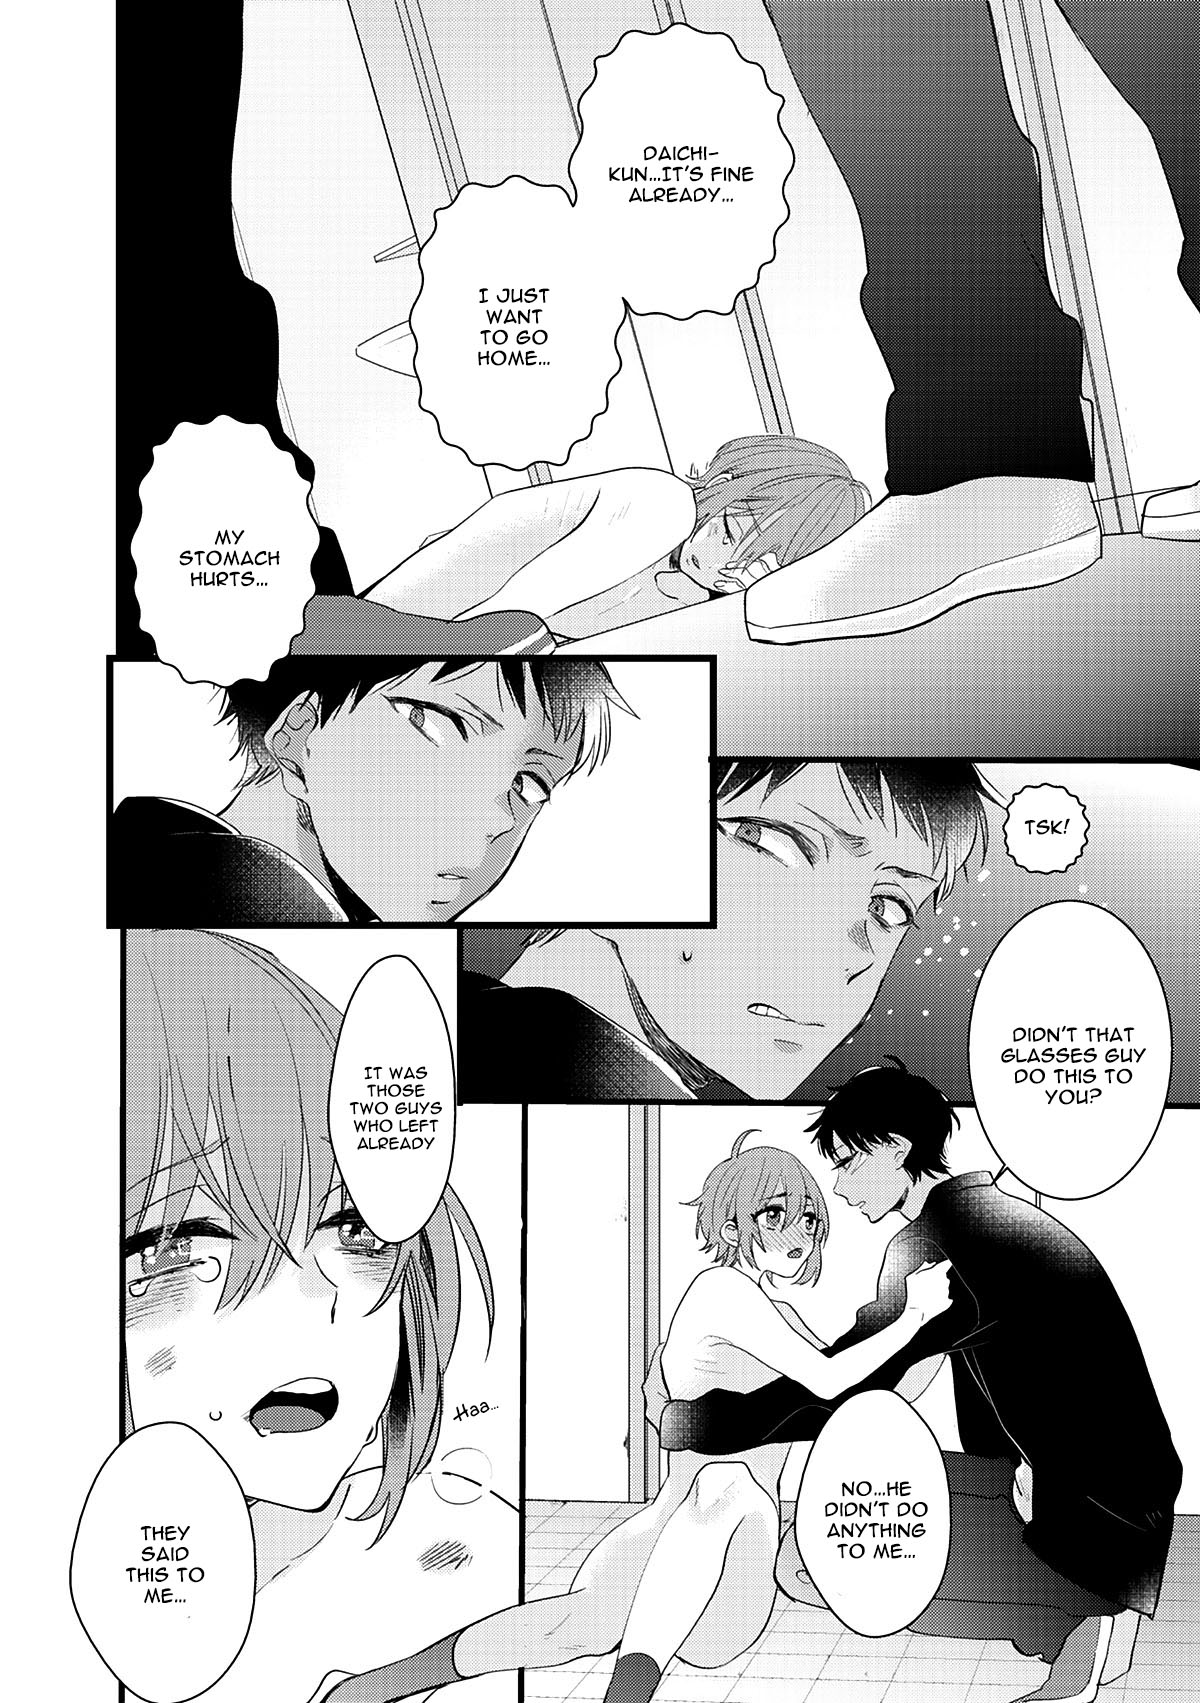 Lovely Play Vol. 1 Ch. 4 Chapter 4